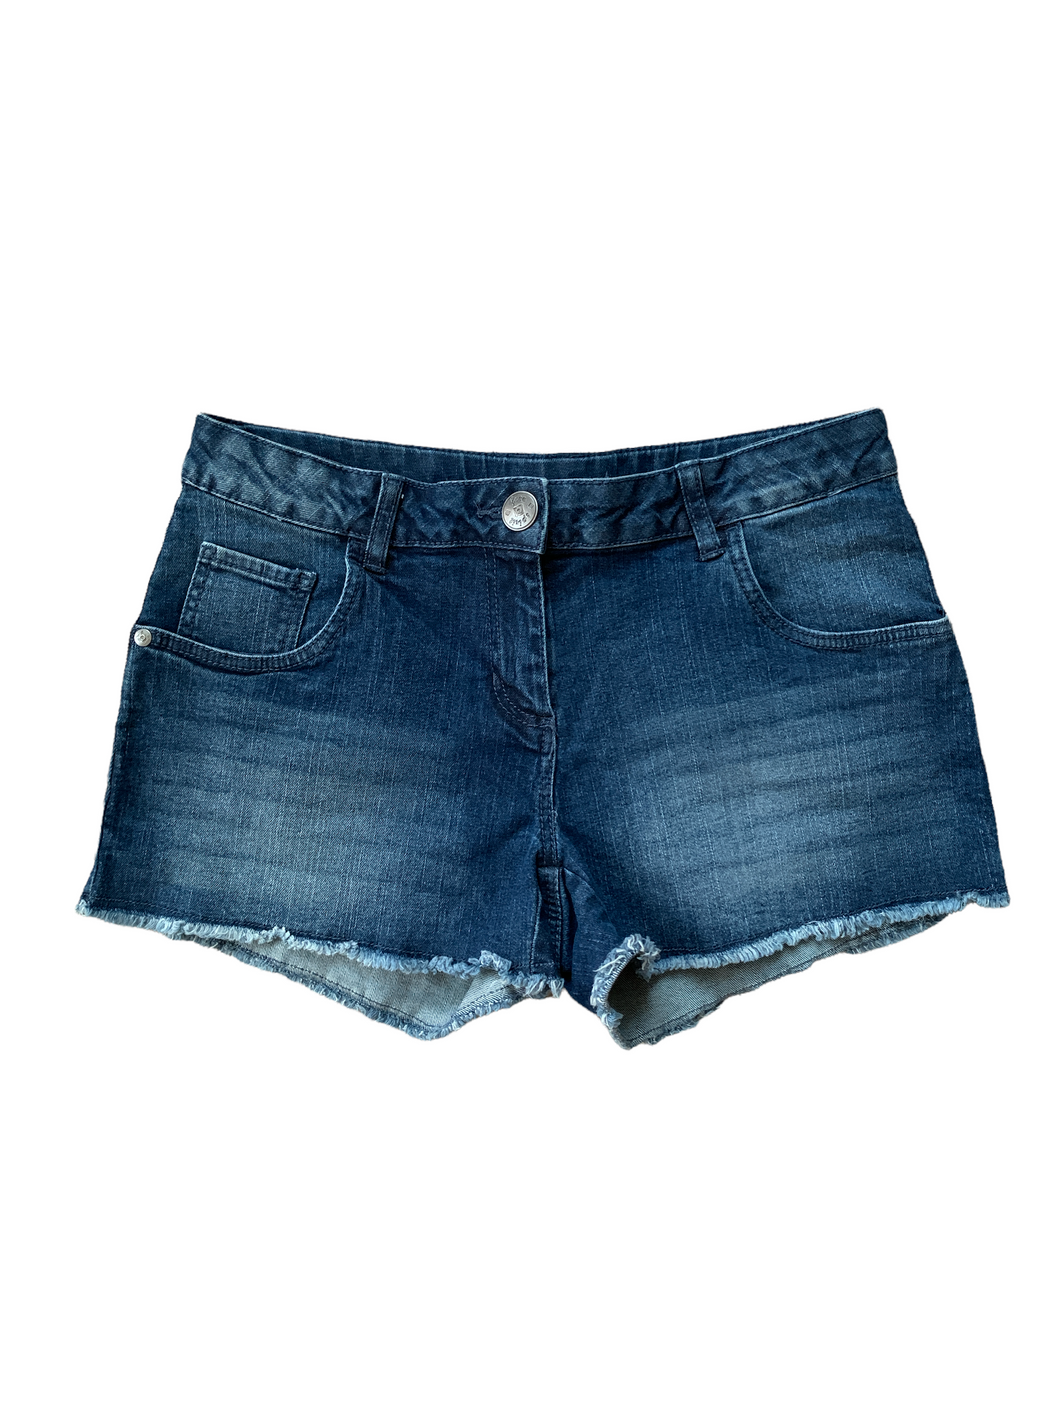 Jeansshorts pepperts 158